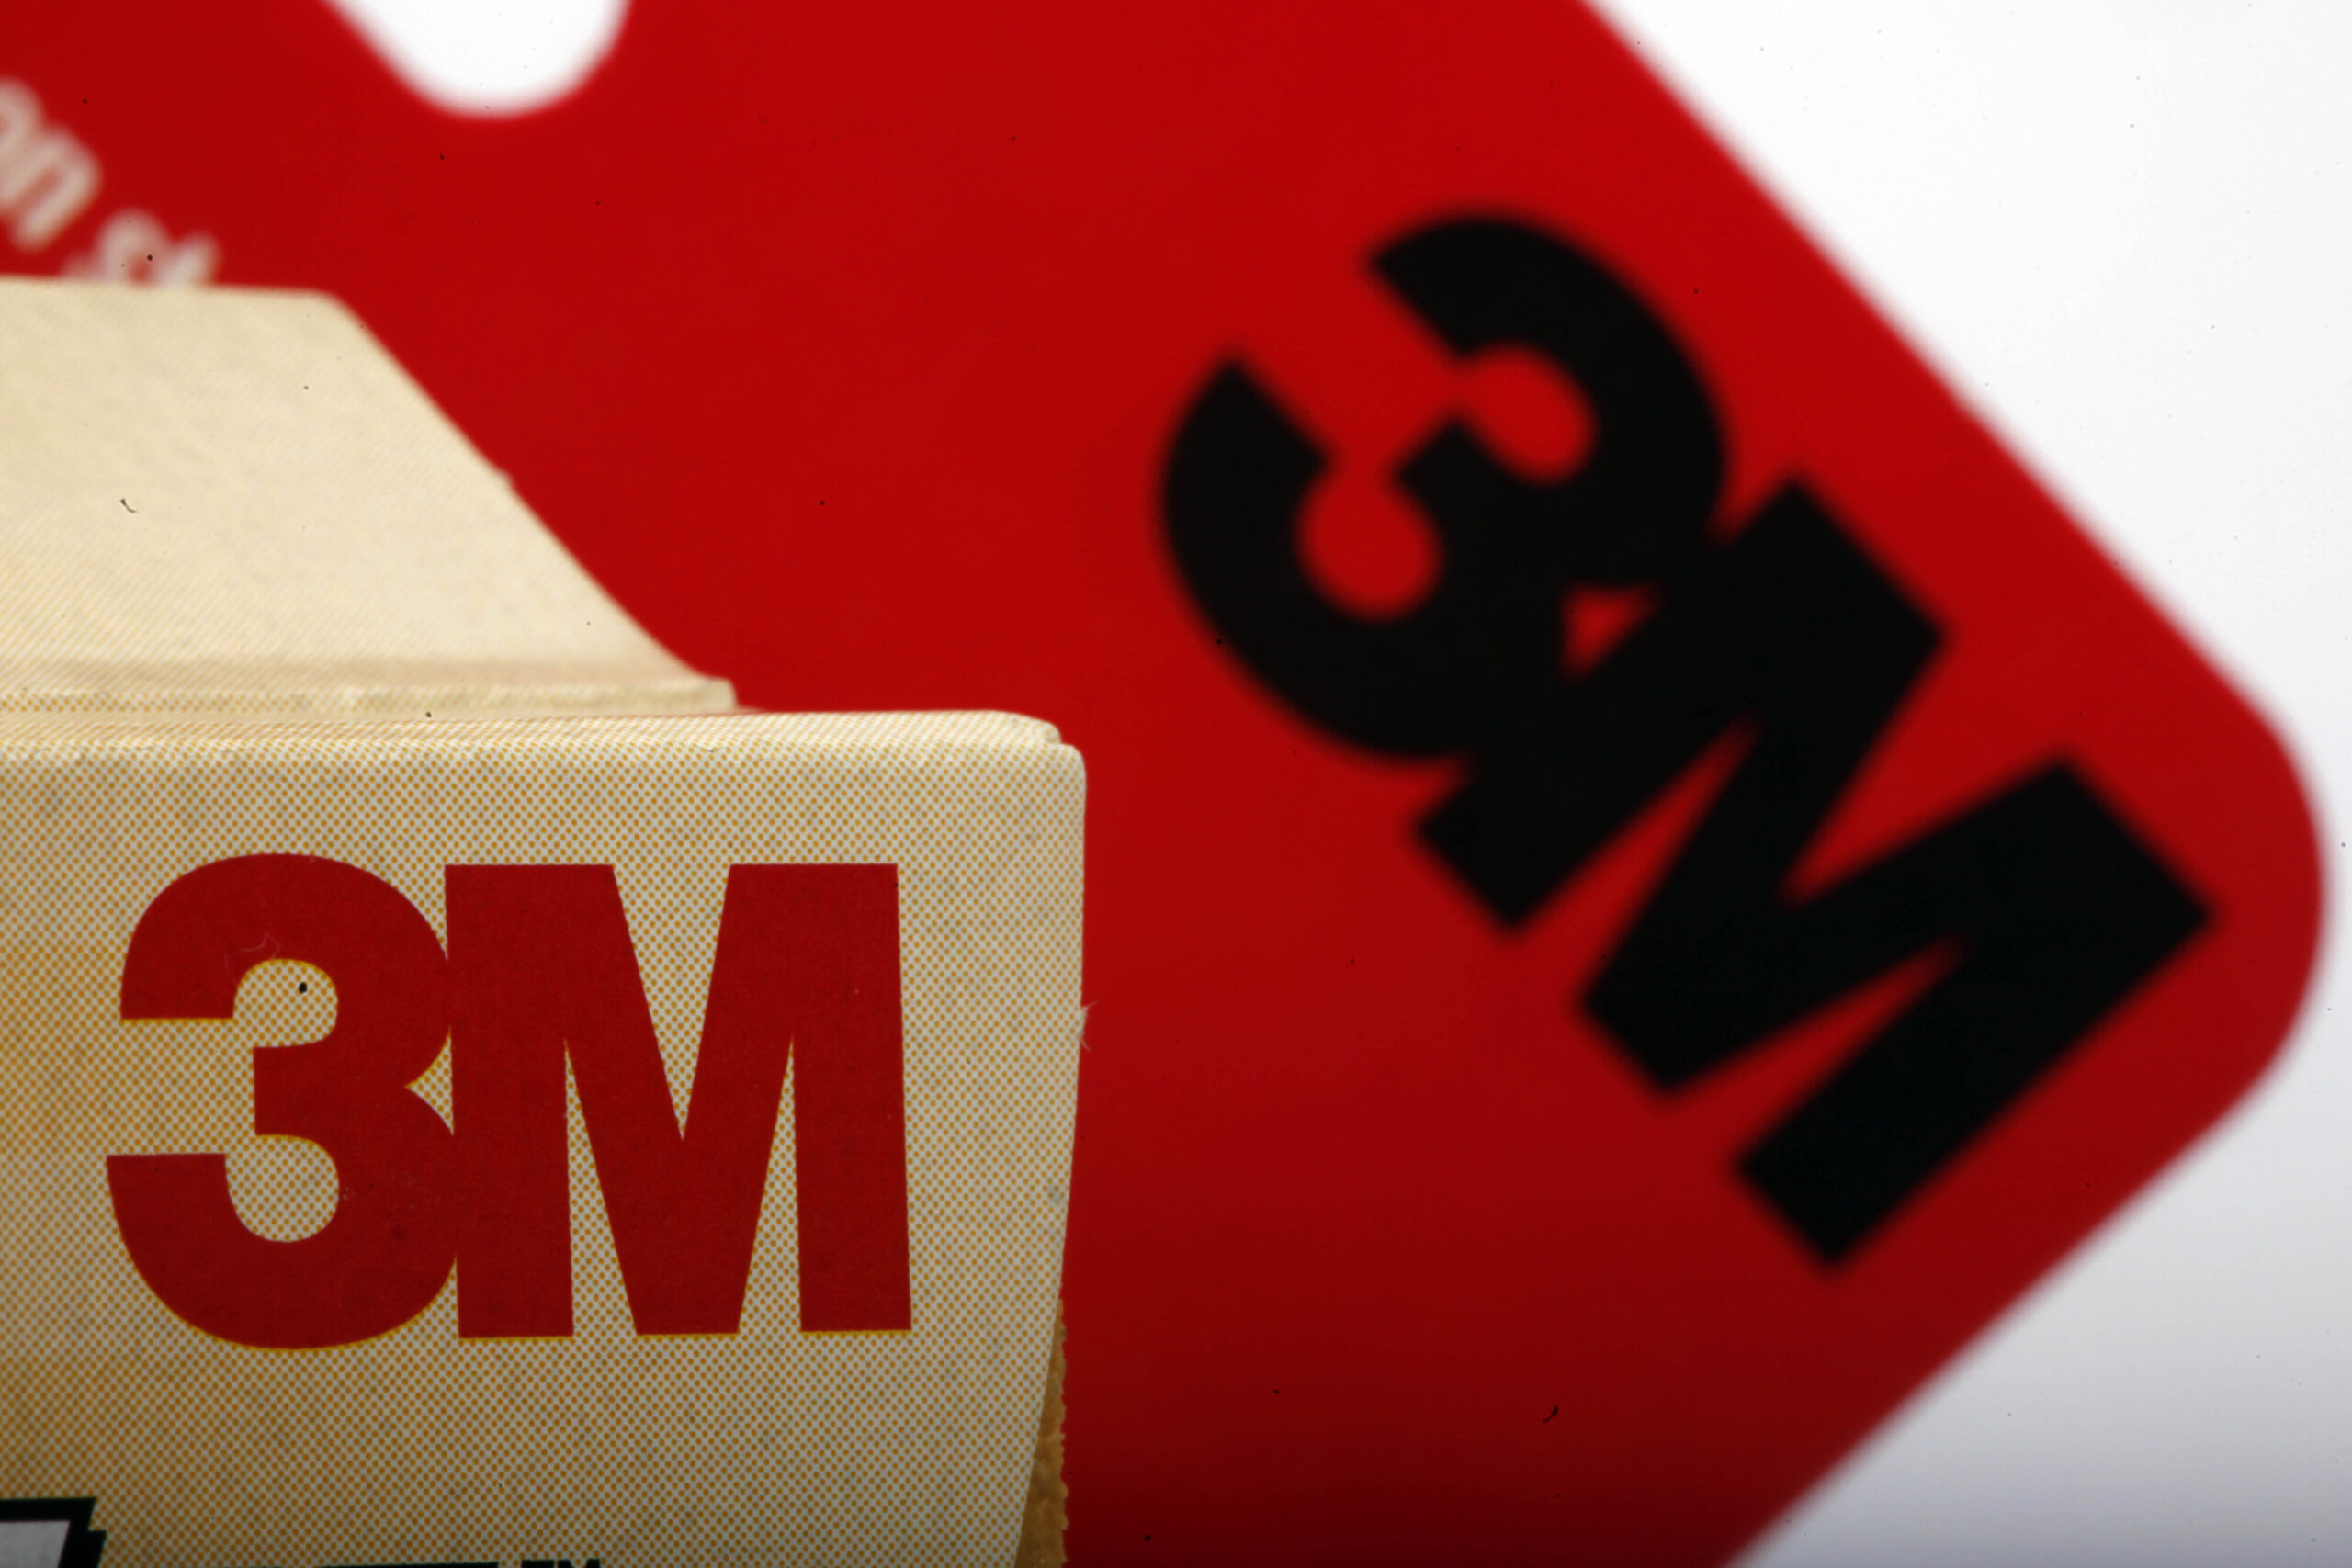 3M cited for safety violations following worker’s death in Wisconsin